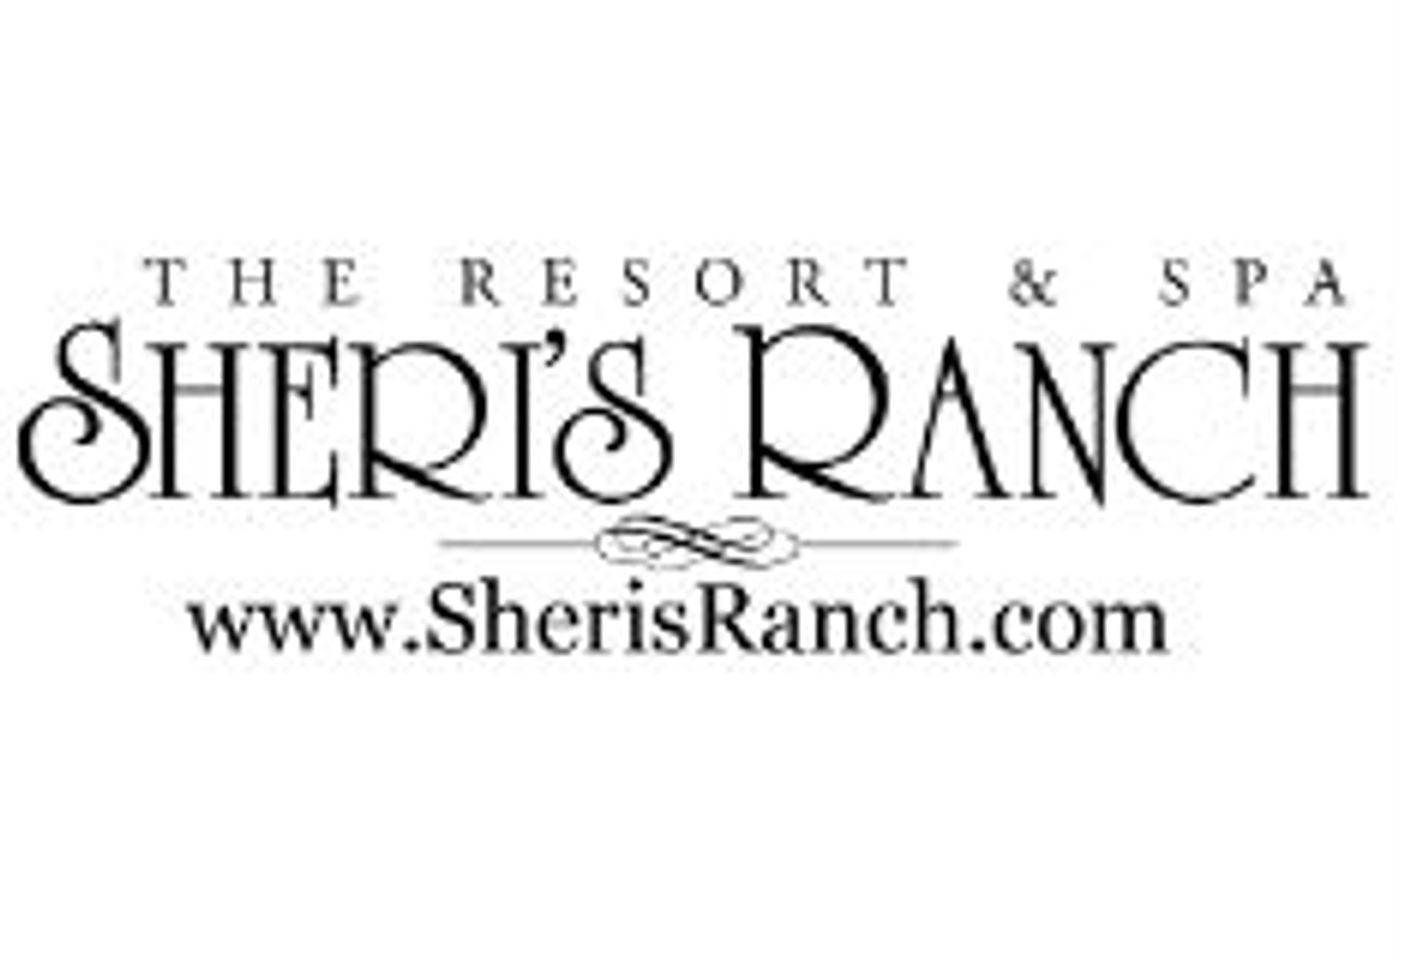 Sheri's Ranch Brothel Releases Celebrity Wish List